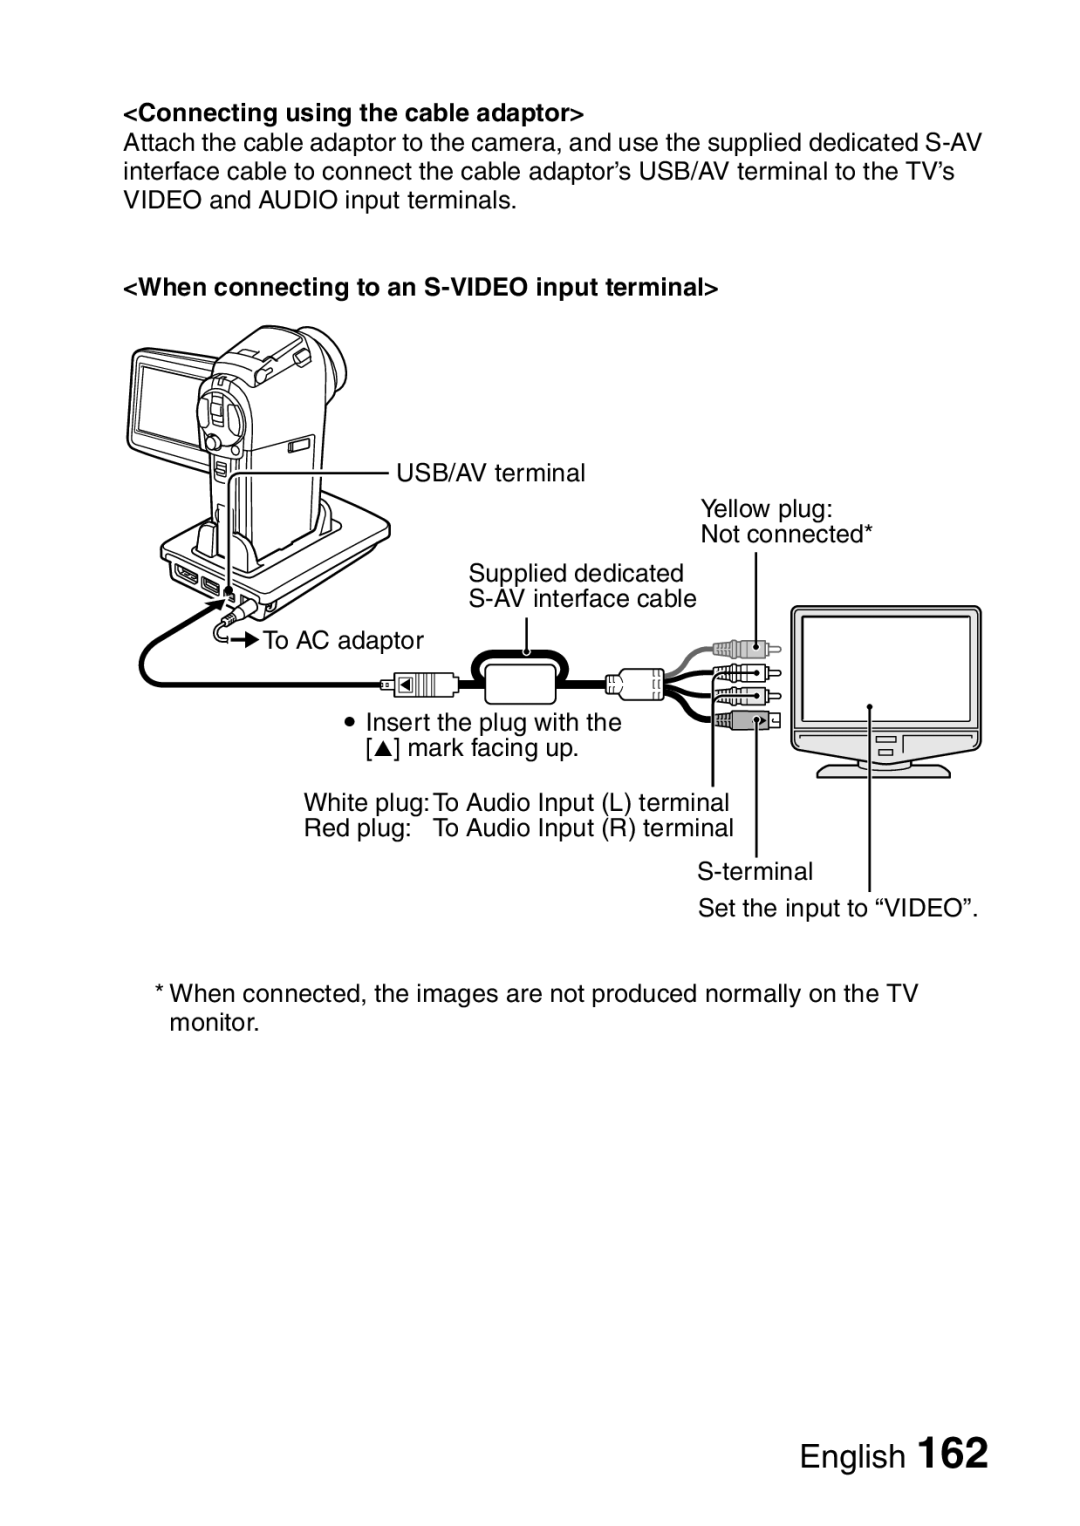 Sanyo VPC-H2GX, VPC-HD2EX Connecting using the cable adaptor, When connecting to an S-VIDEO input terminal 